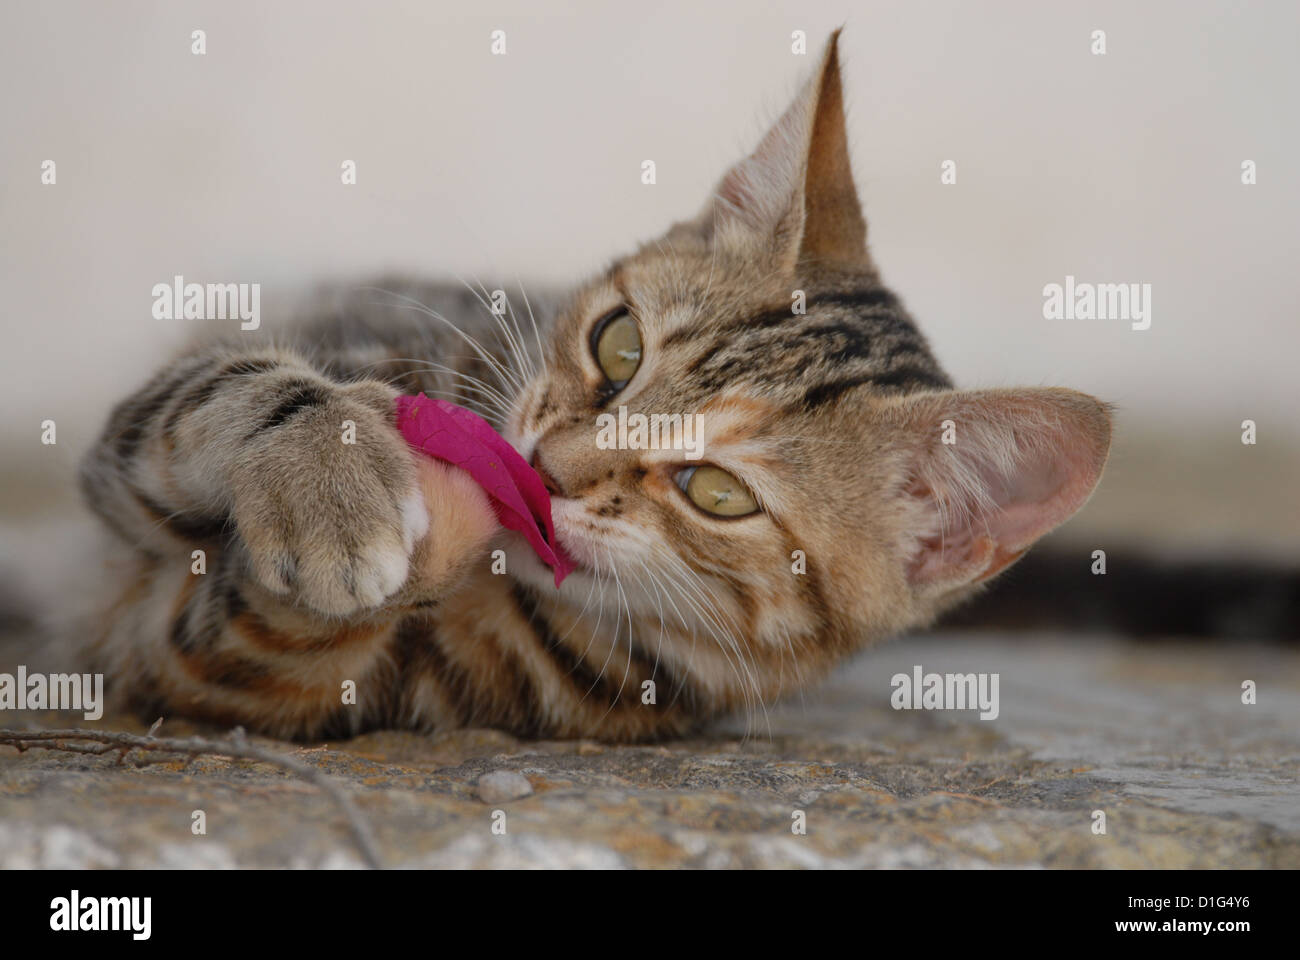 Tortie Tabby (Torbie) and White, is lying on a rocky step, playing with a blossom of Bougainvillea, Greece, Dodecanese Island, Stock Photo